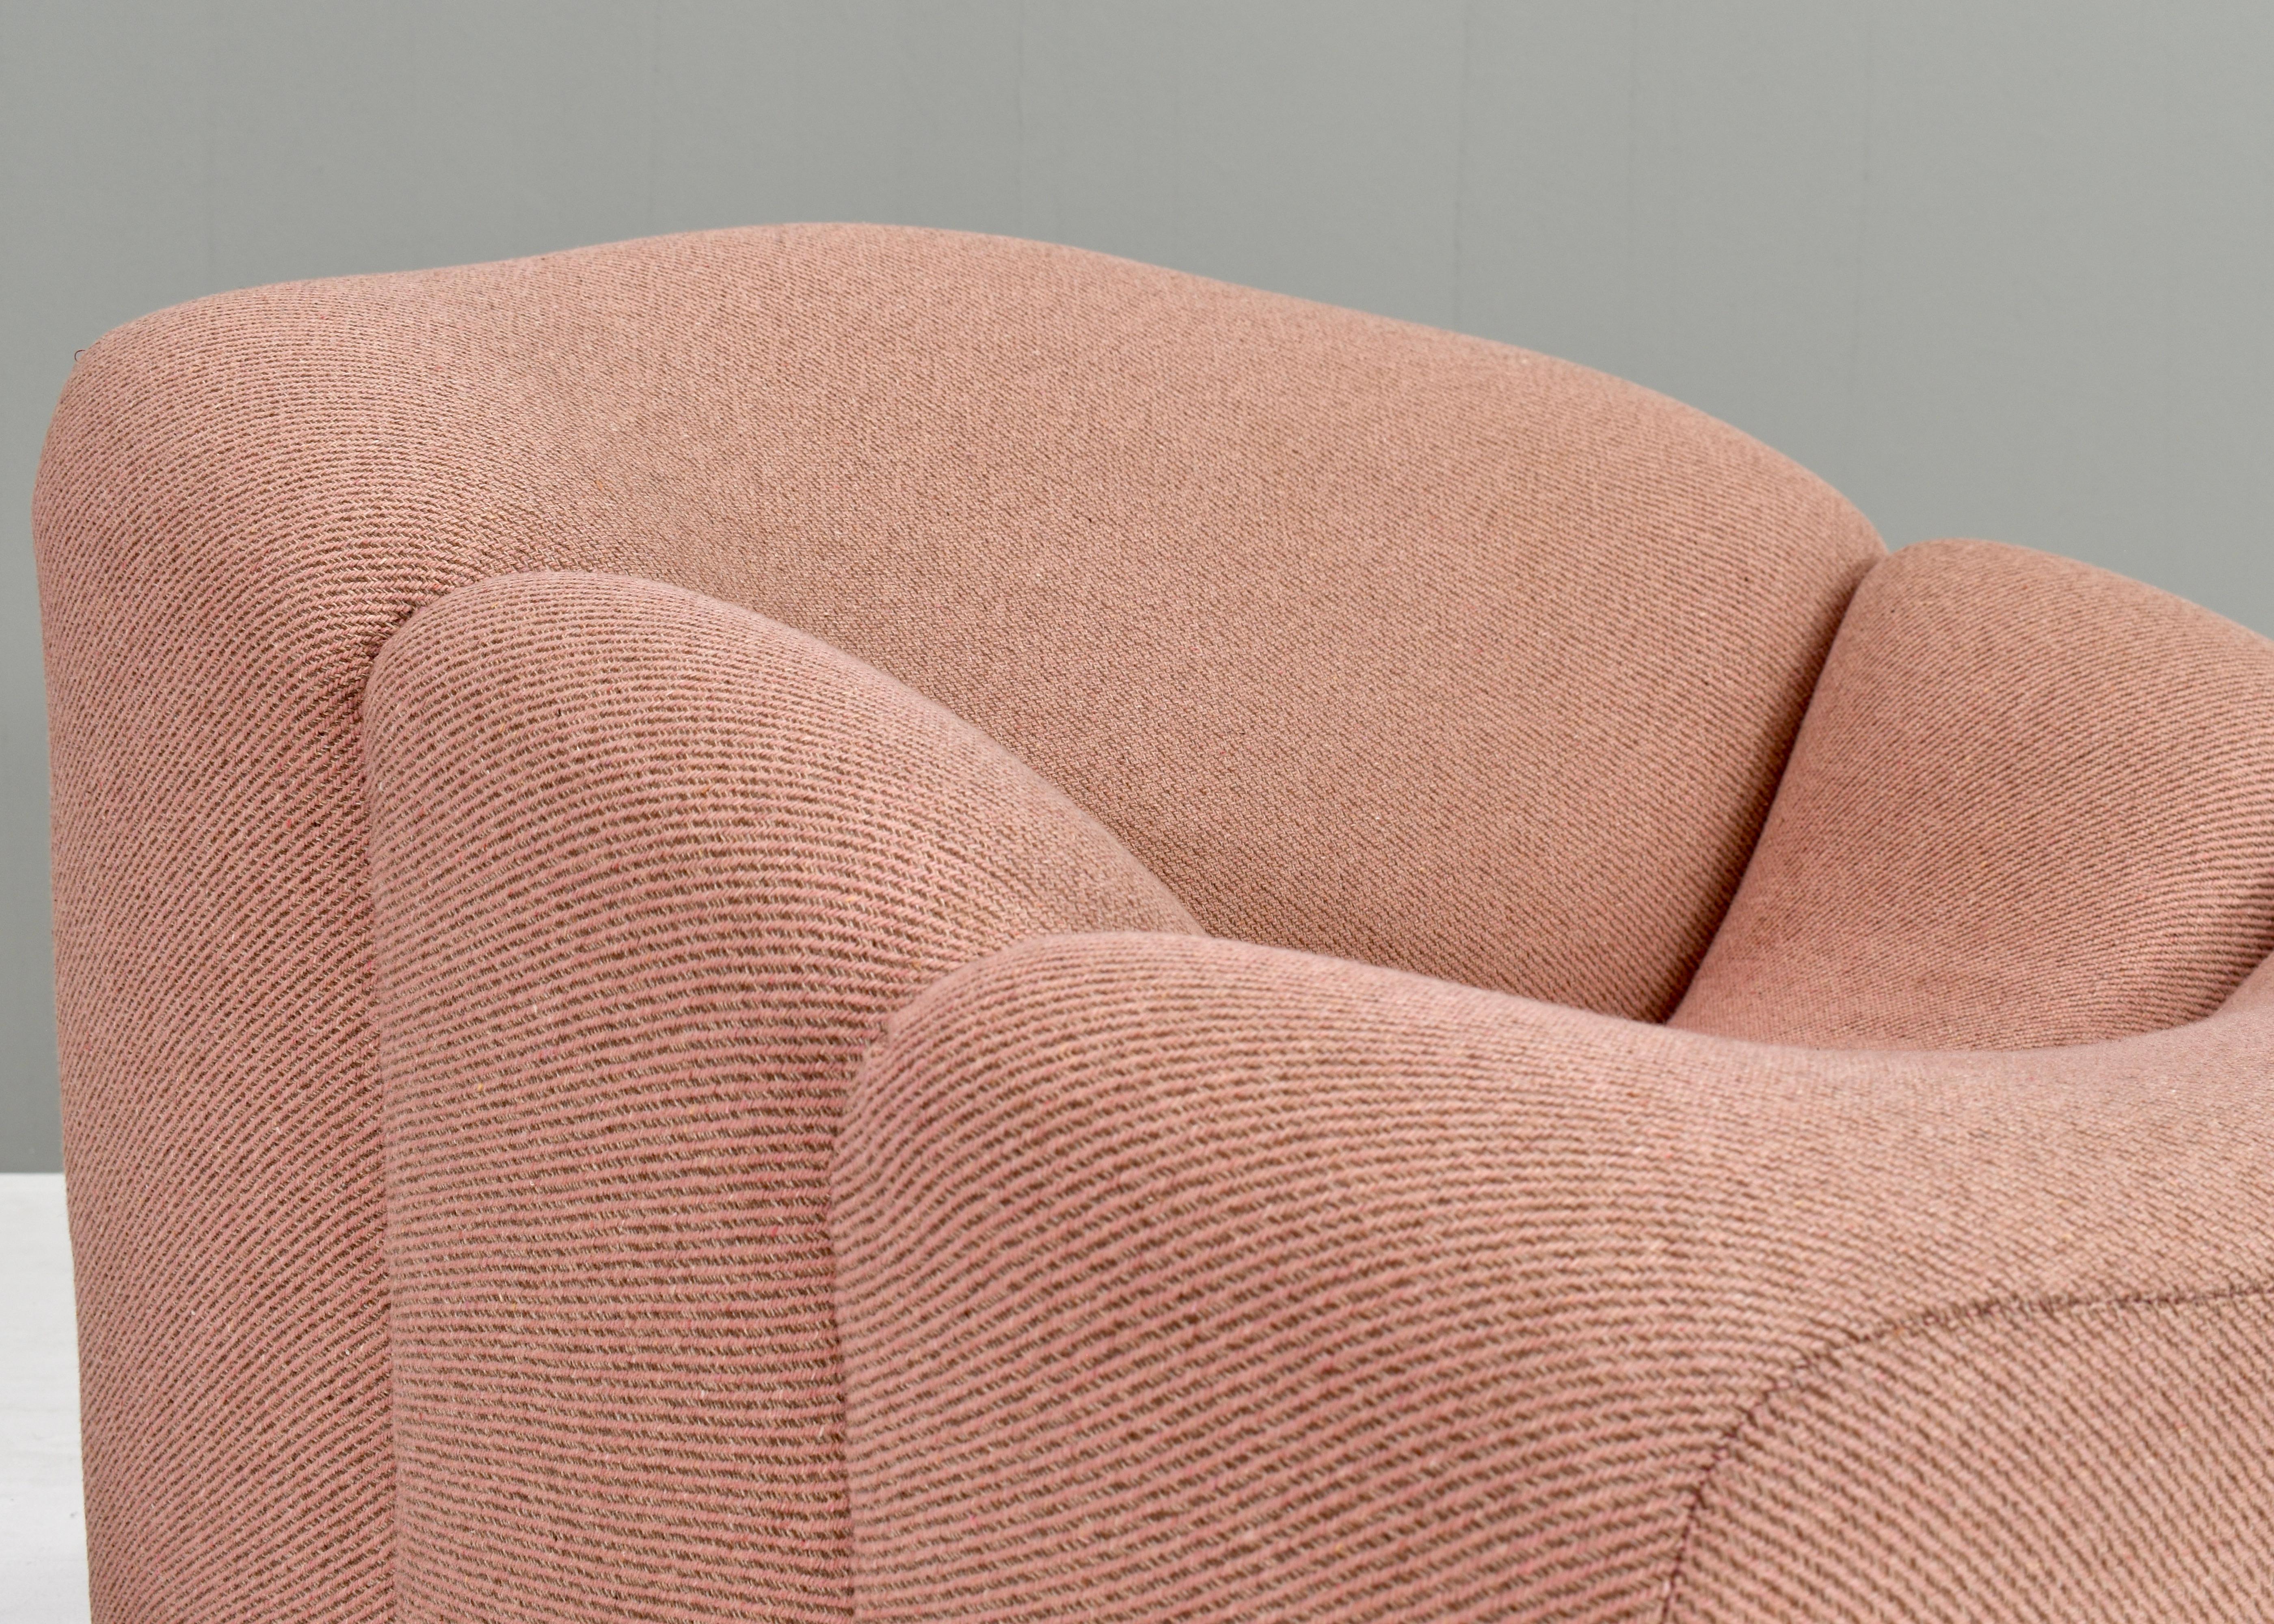 ABCD Armchair by Pierre Paulin for ARTIFORT Original Fabric, Netherlands - 1968 4